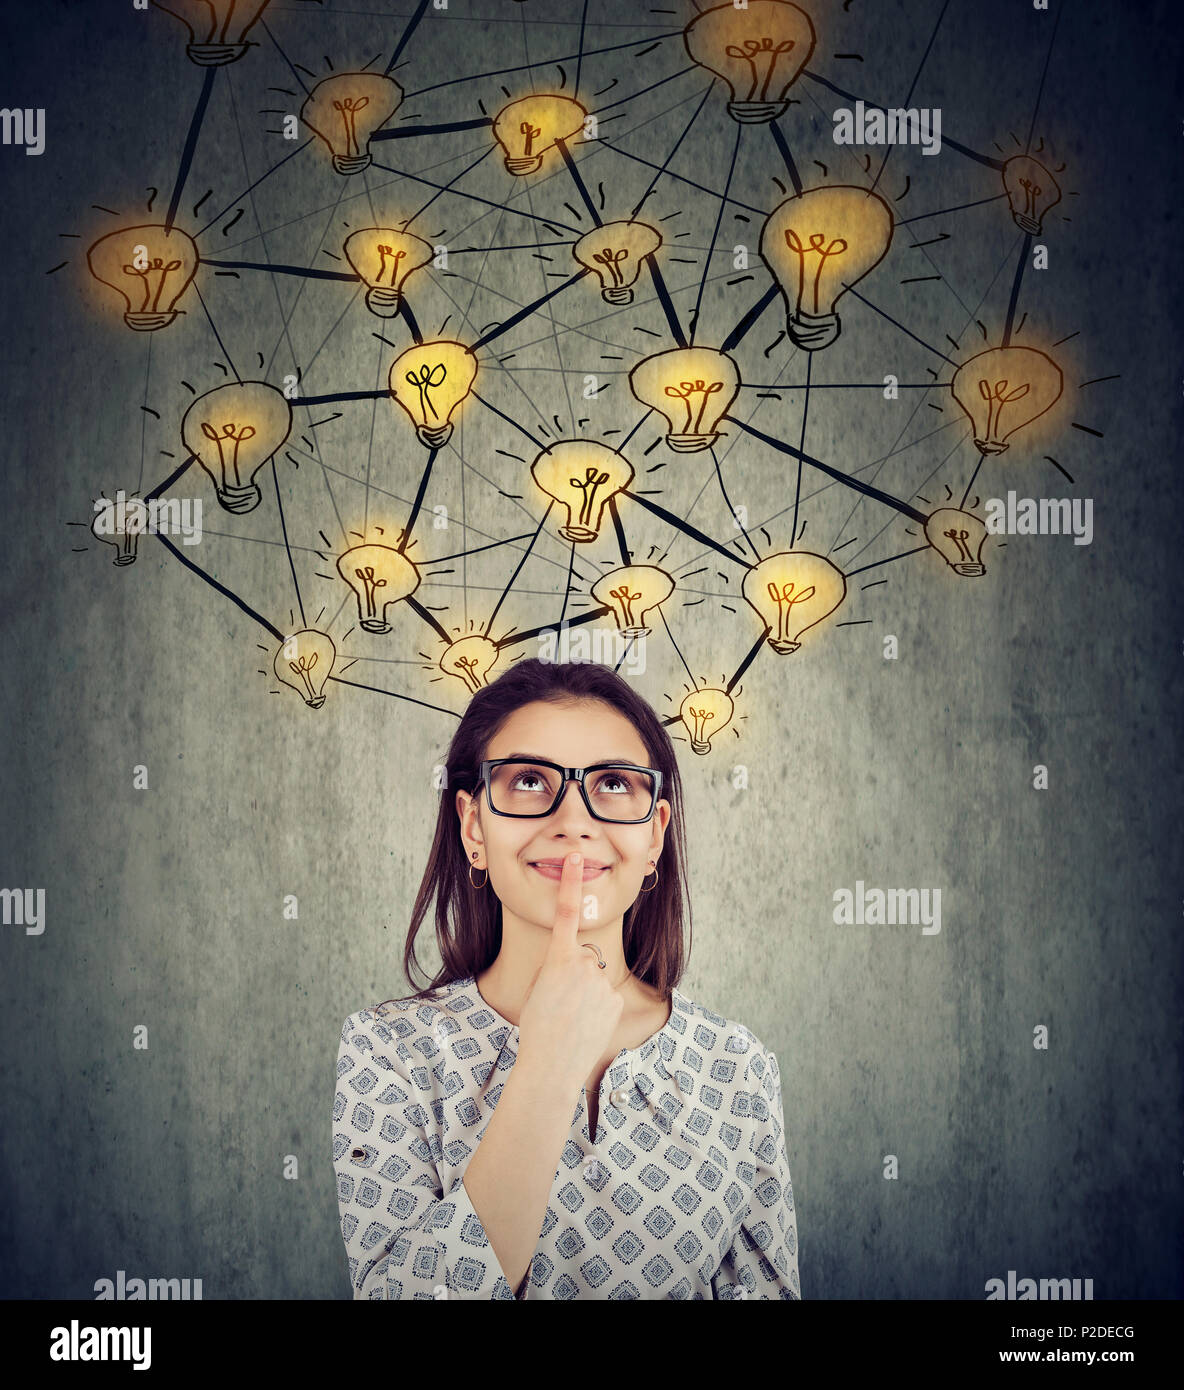 Cute woman in glasses with many ideas light bulbs above head looking up isolated on wall background. Stock Photo